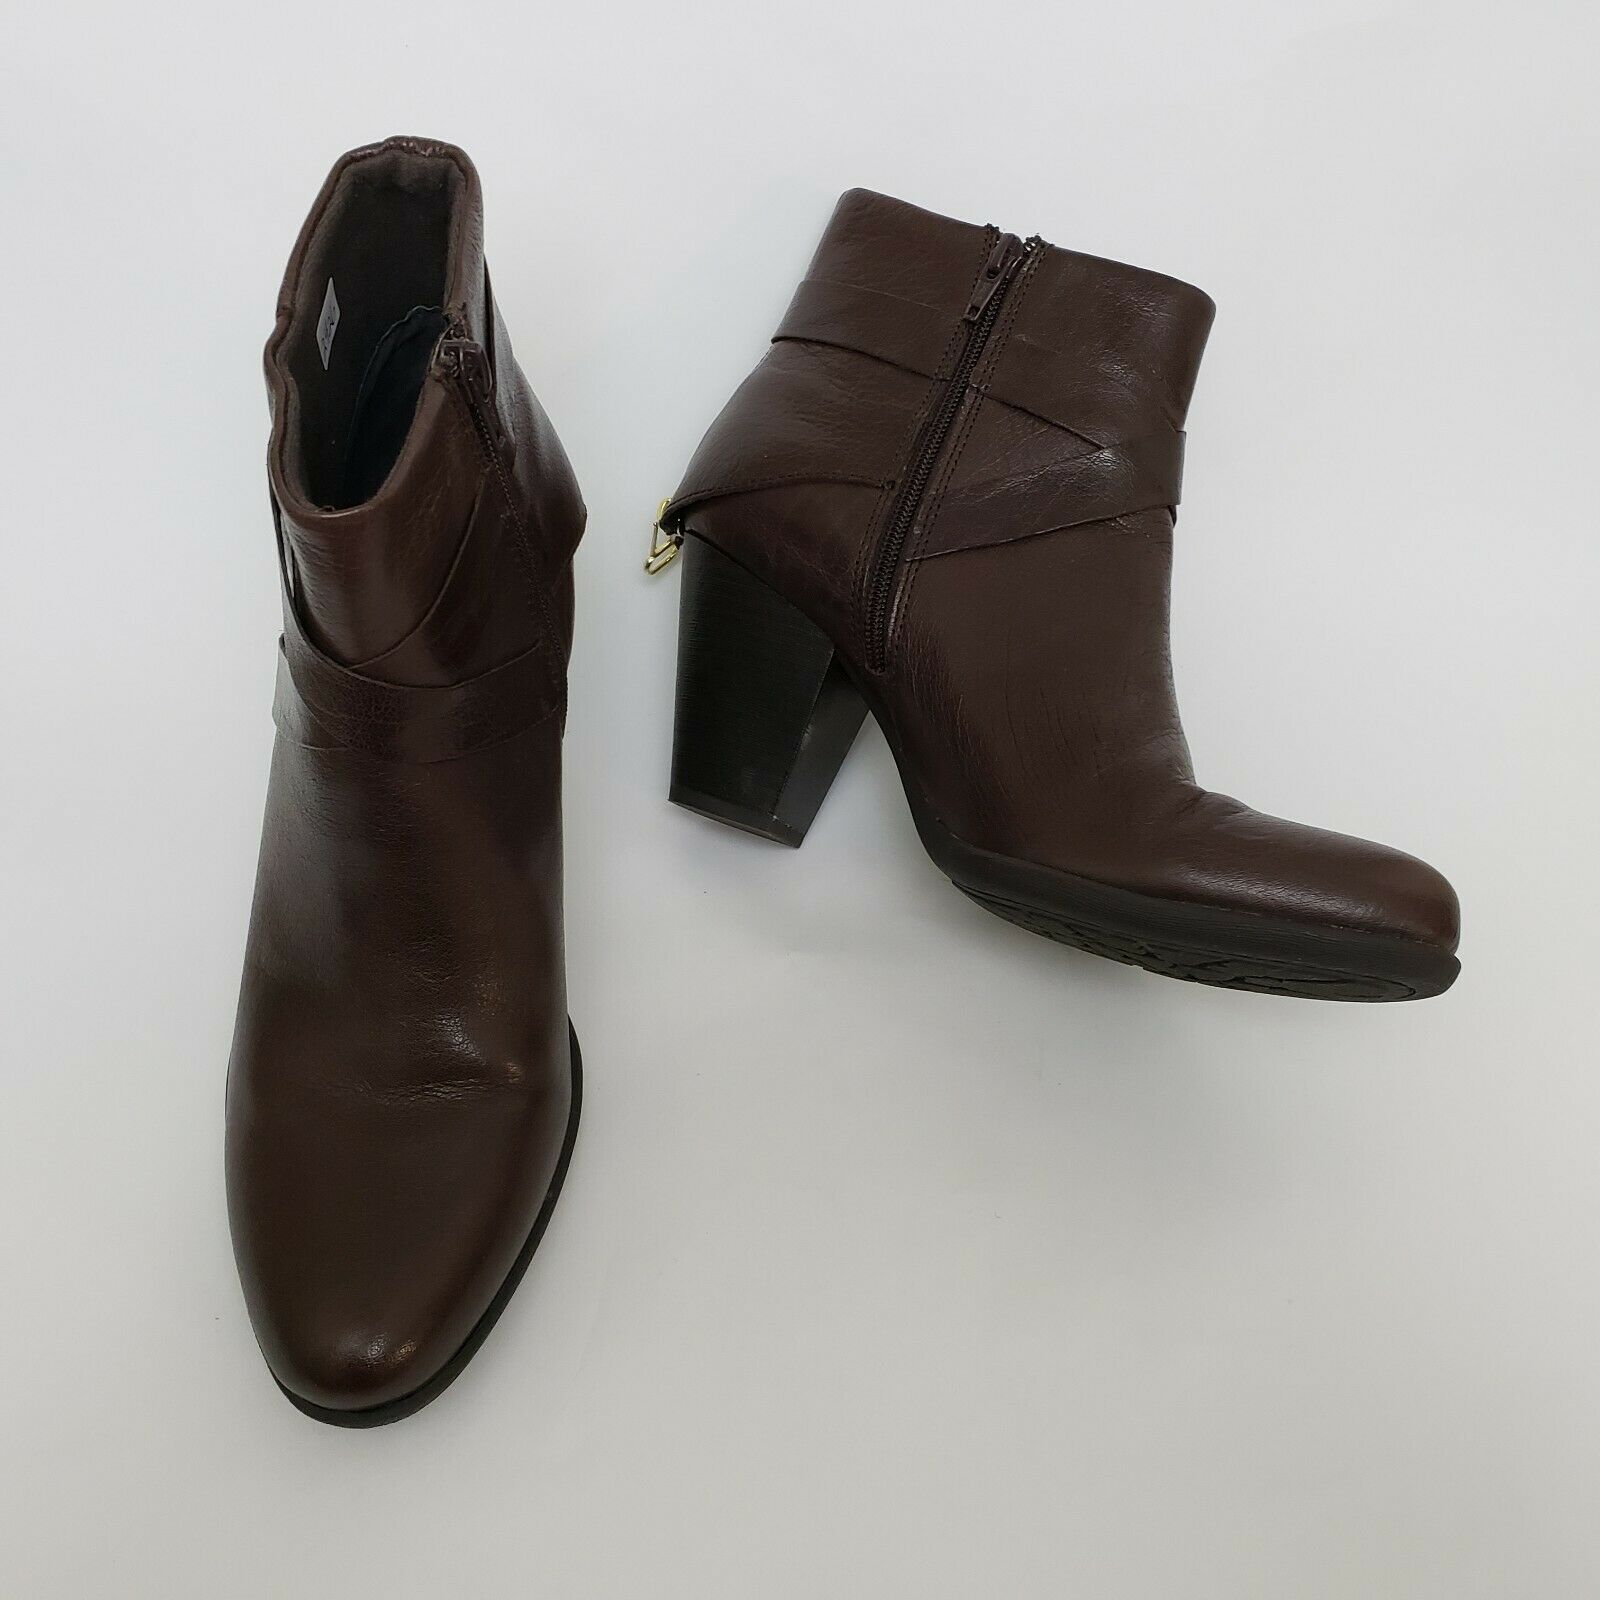 Primary image for Born BOC Ankle Boots Booties Shoes Brown Stack Heels Zipper Leather Size 9.5 M